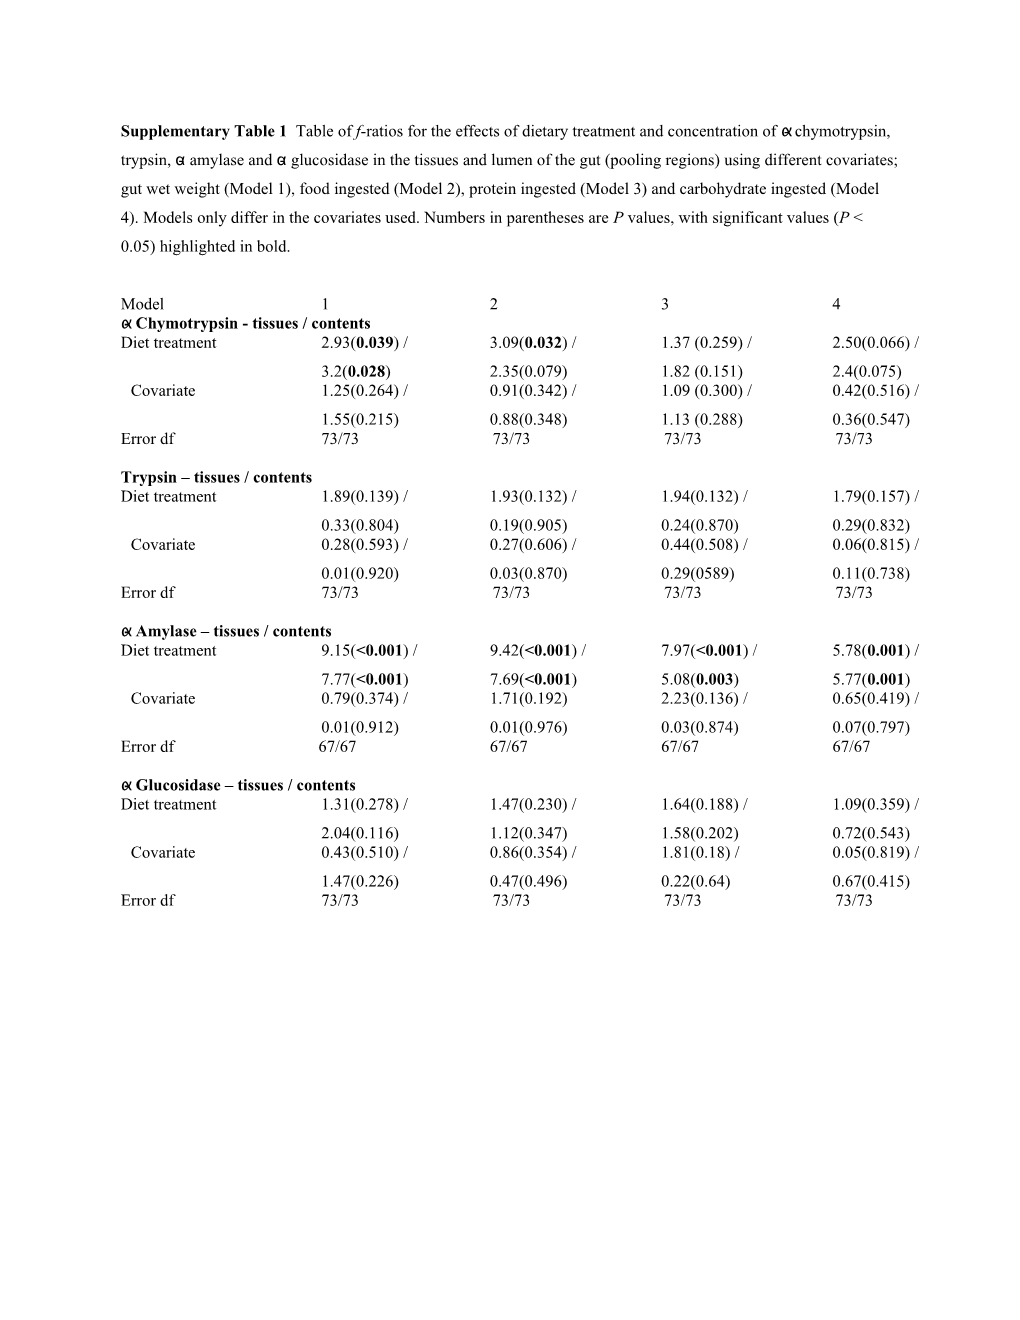 Supplementary Table 1 Table of F-Ratios for the Effects of Dietary Treatment and Concentration